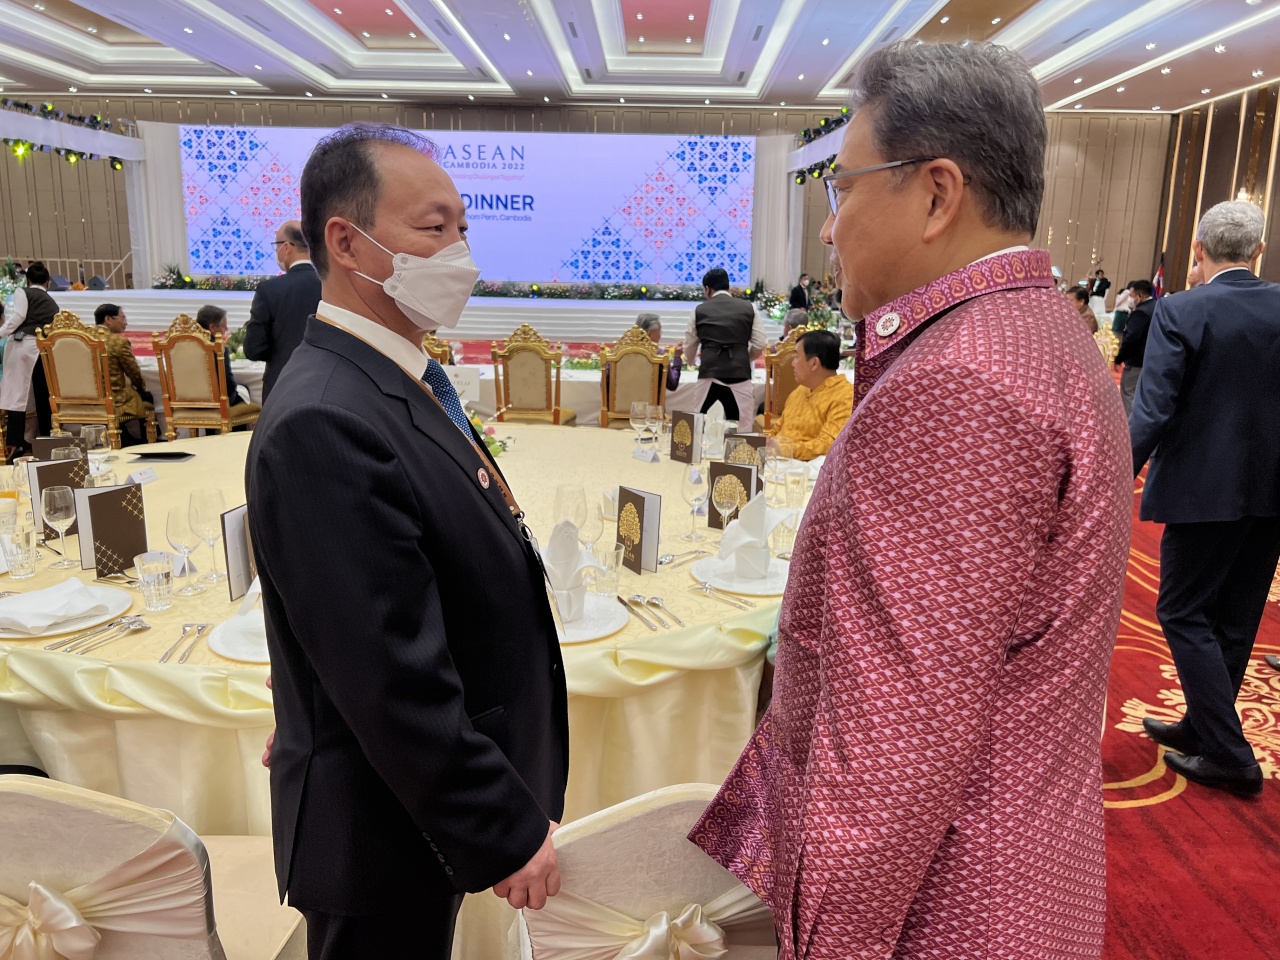 South Korean Foreign Minister Park Jin (right) meets An Kwang-il, North Korea's top delegate to the ASEAN Regional Forum, during a welcome dinner in Phnom Penh on Thursday. (Yonhap)